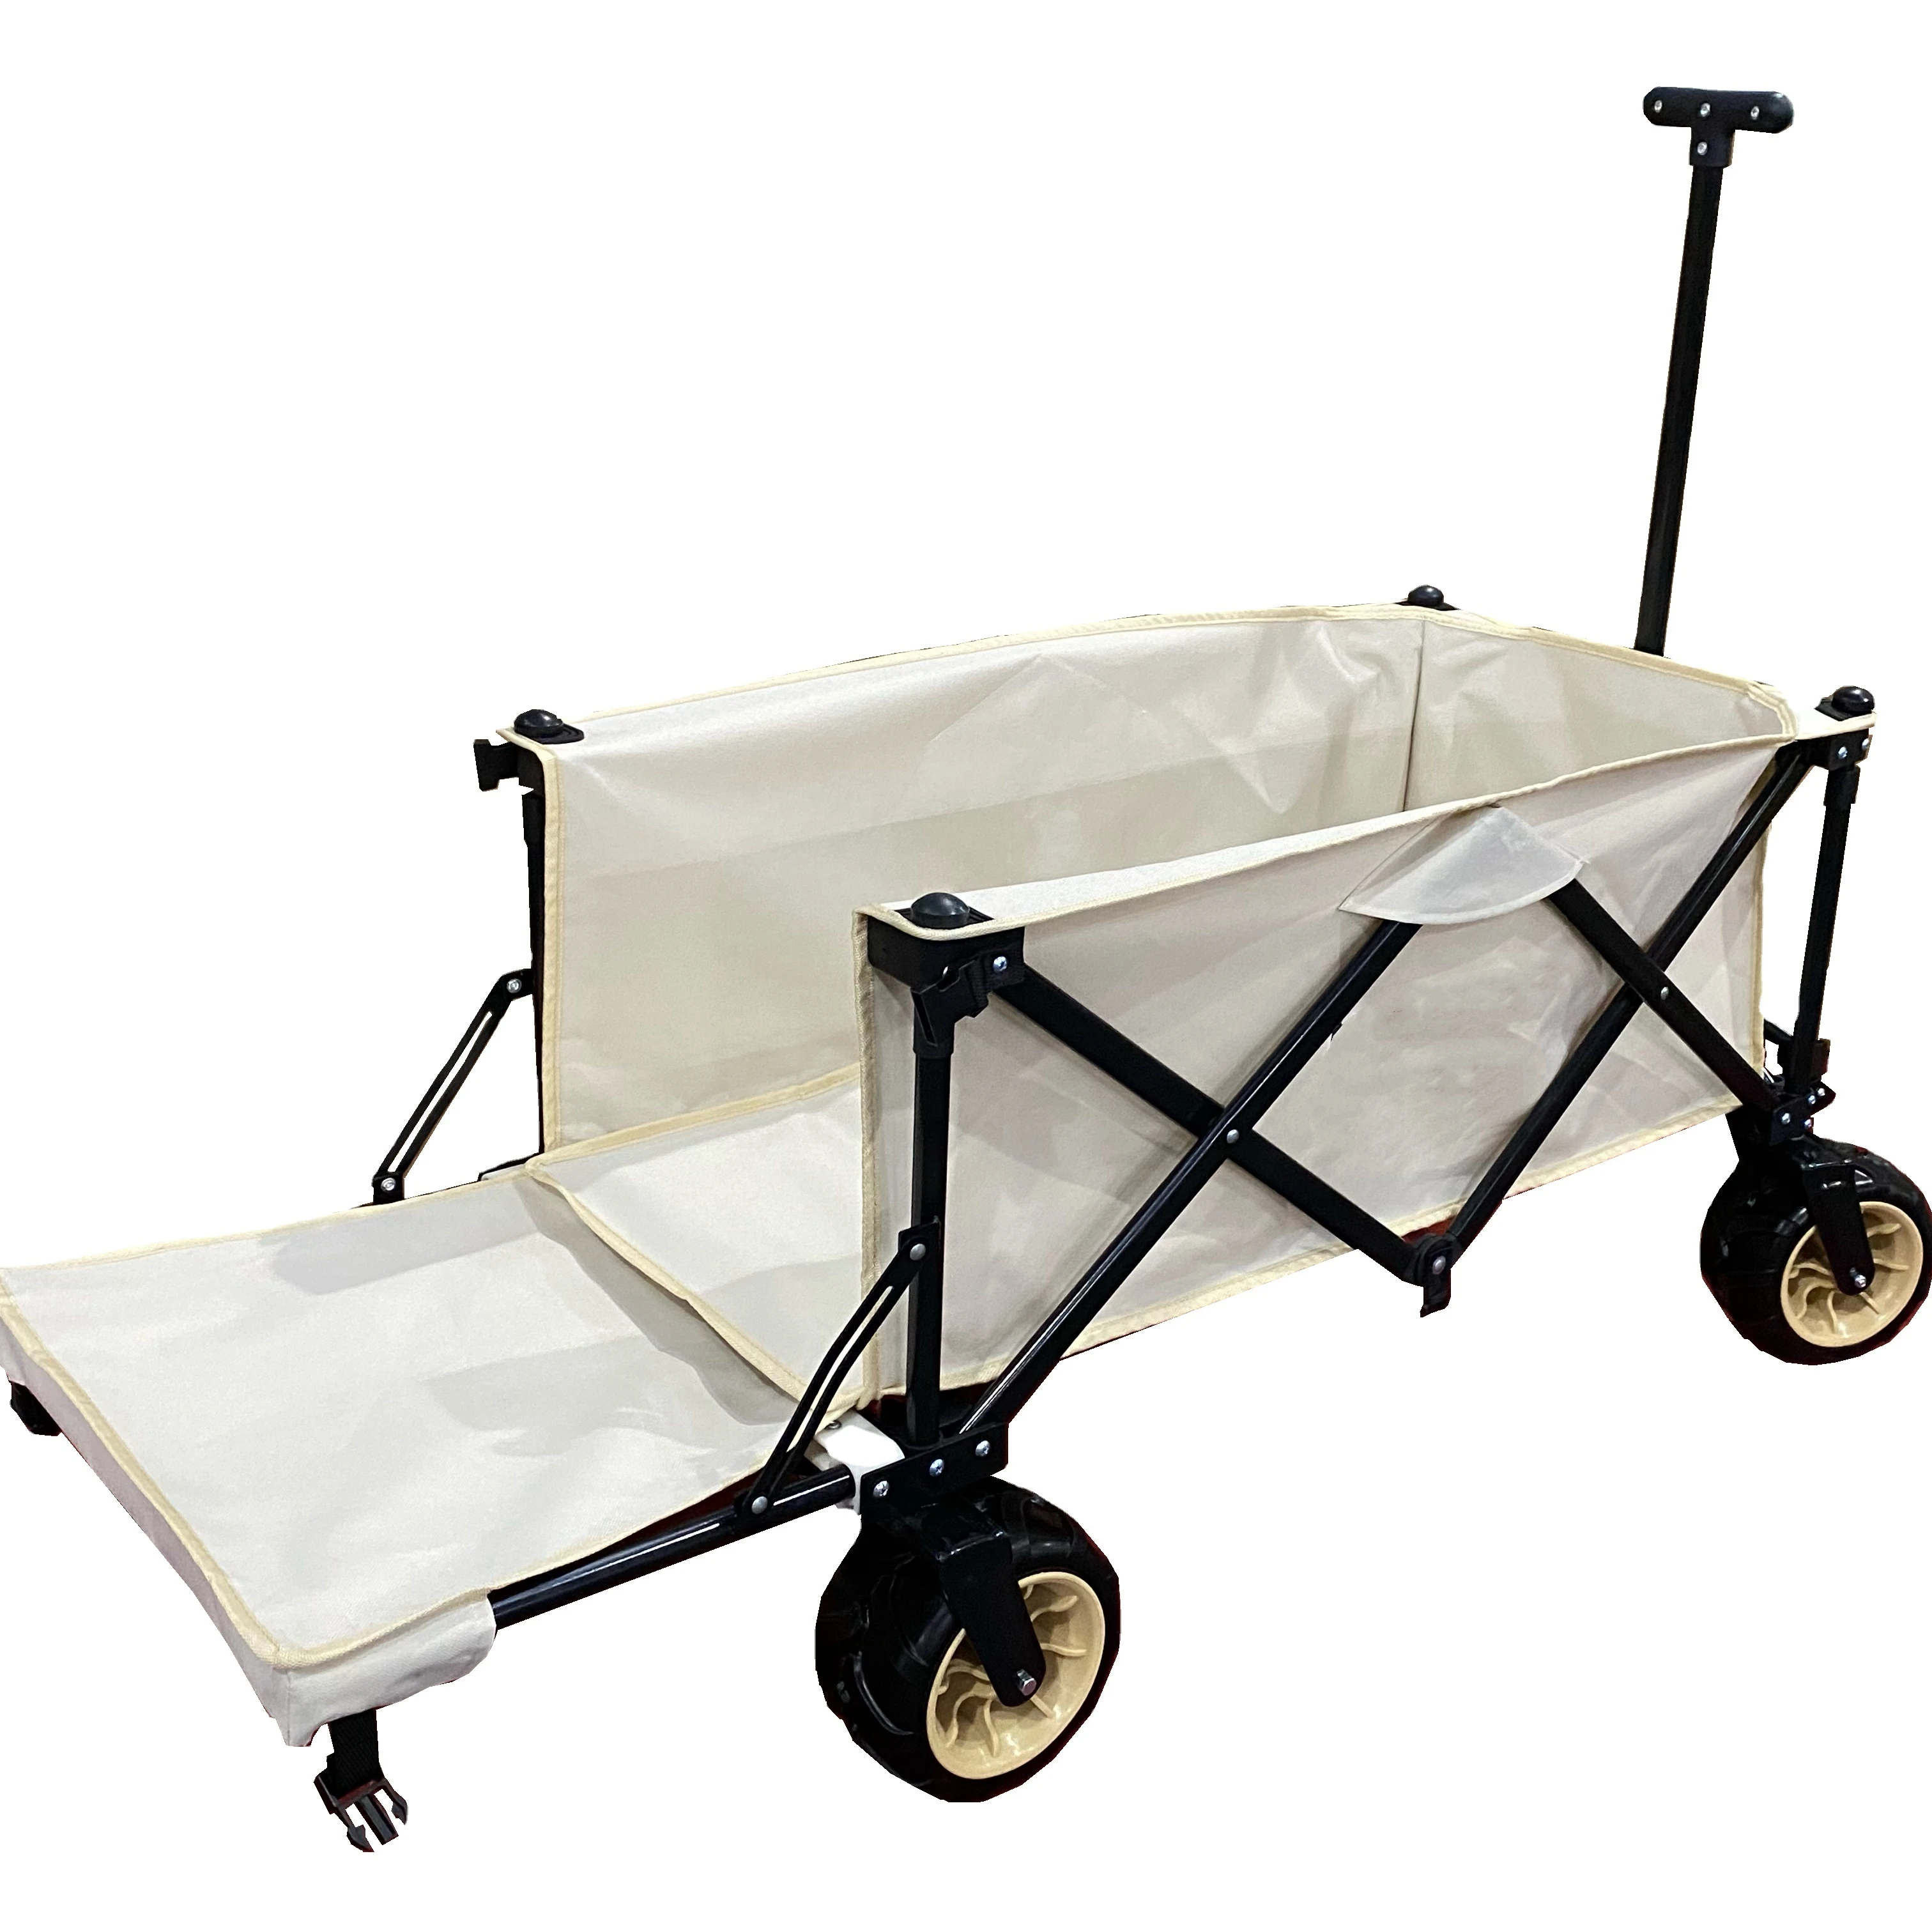 Collapsible Folding Heavy Duty Garden Pull Wagon Folding Outdoor 